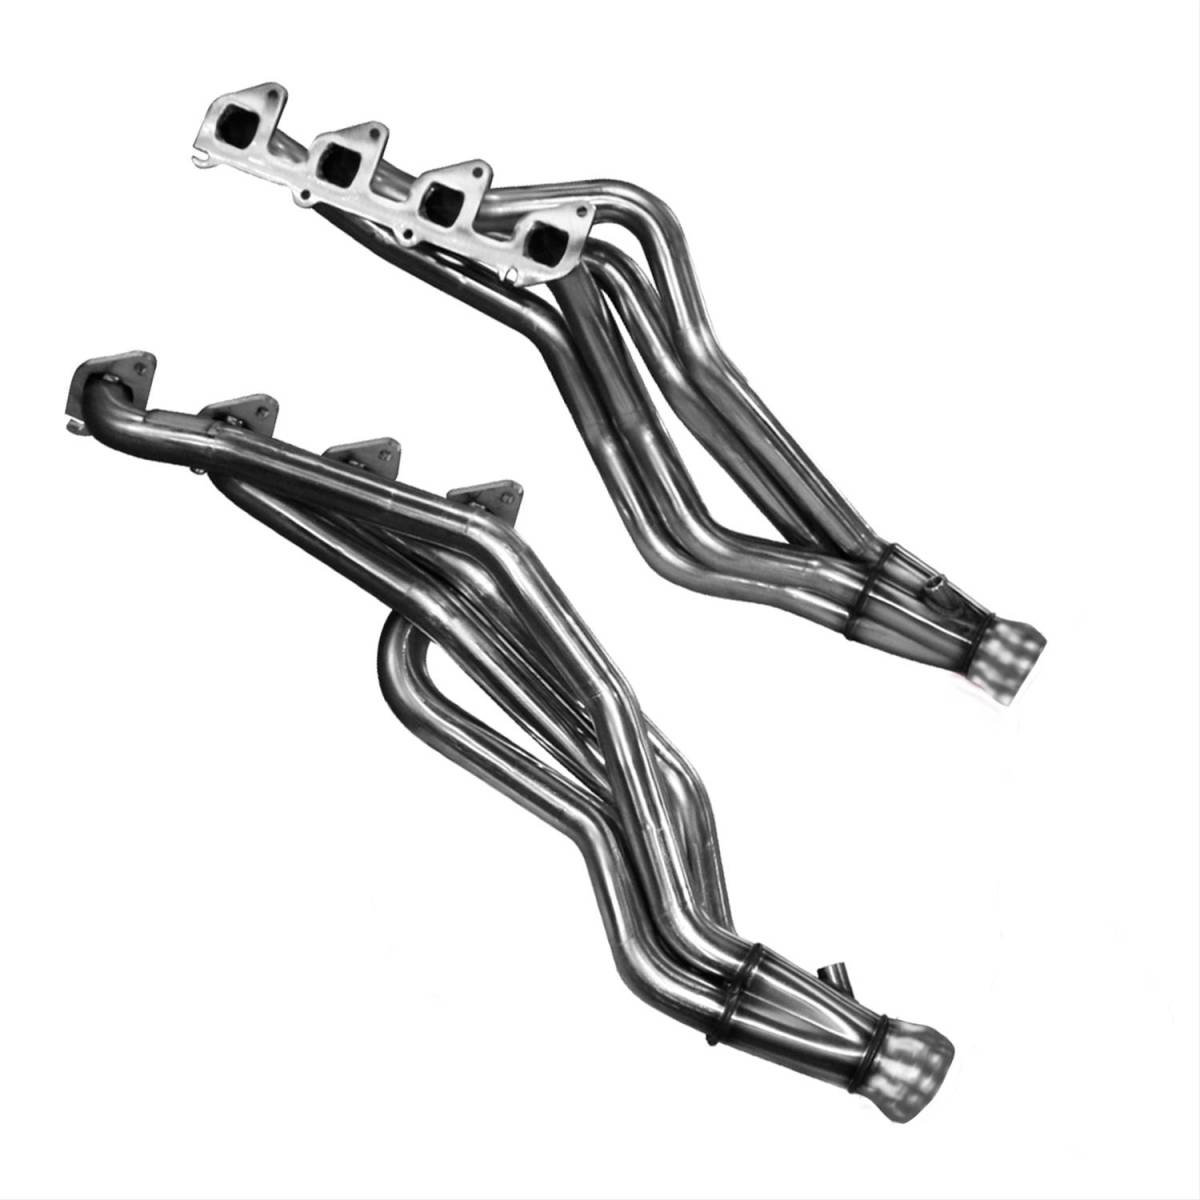 Kooks Headers - Ford Raptor SVT 6.2L 2010-2014 Kooks Long Tube Headers & Competition Only Y-Pipe 1 3/4" X 3" - Image 1